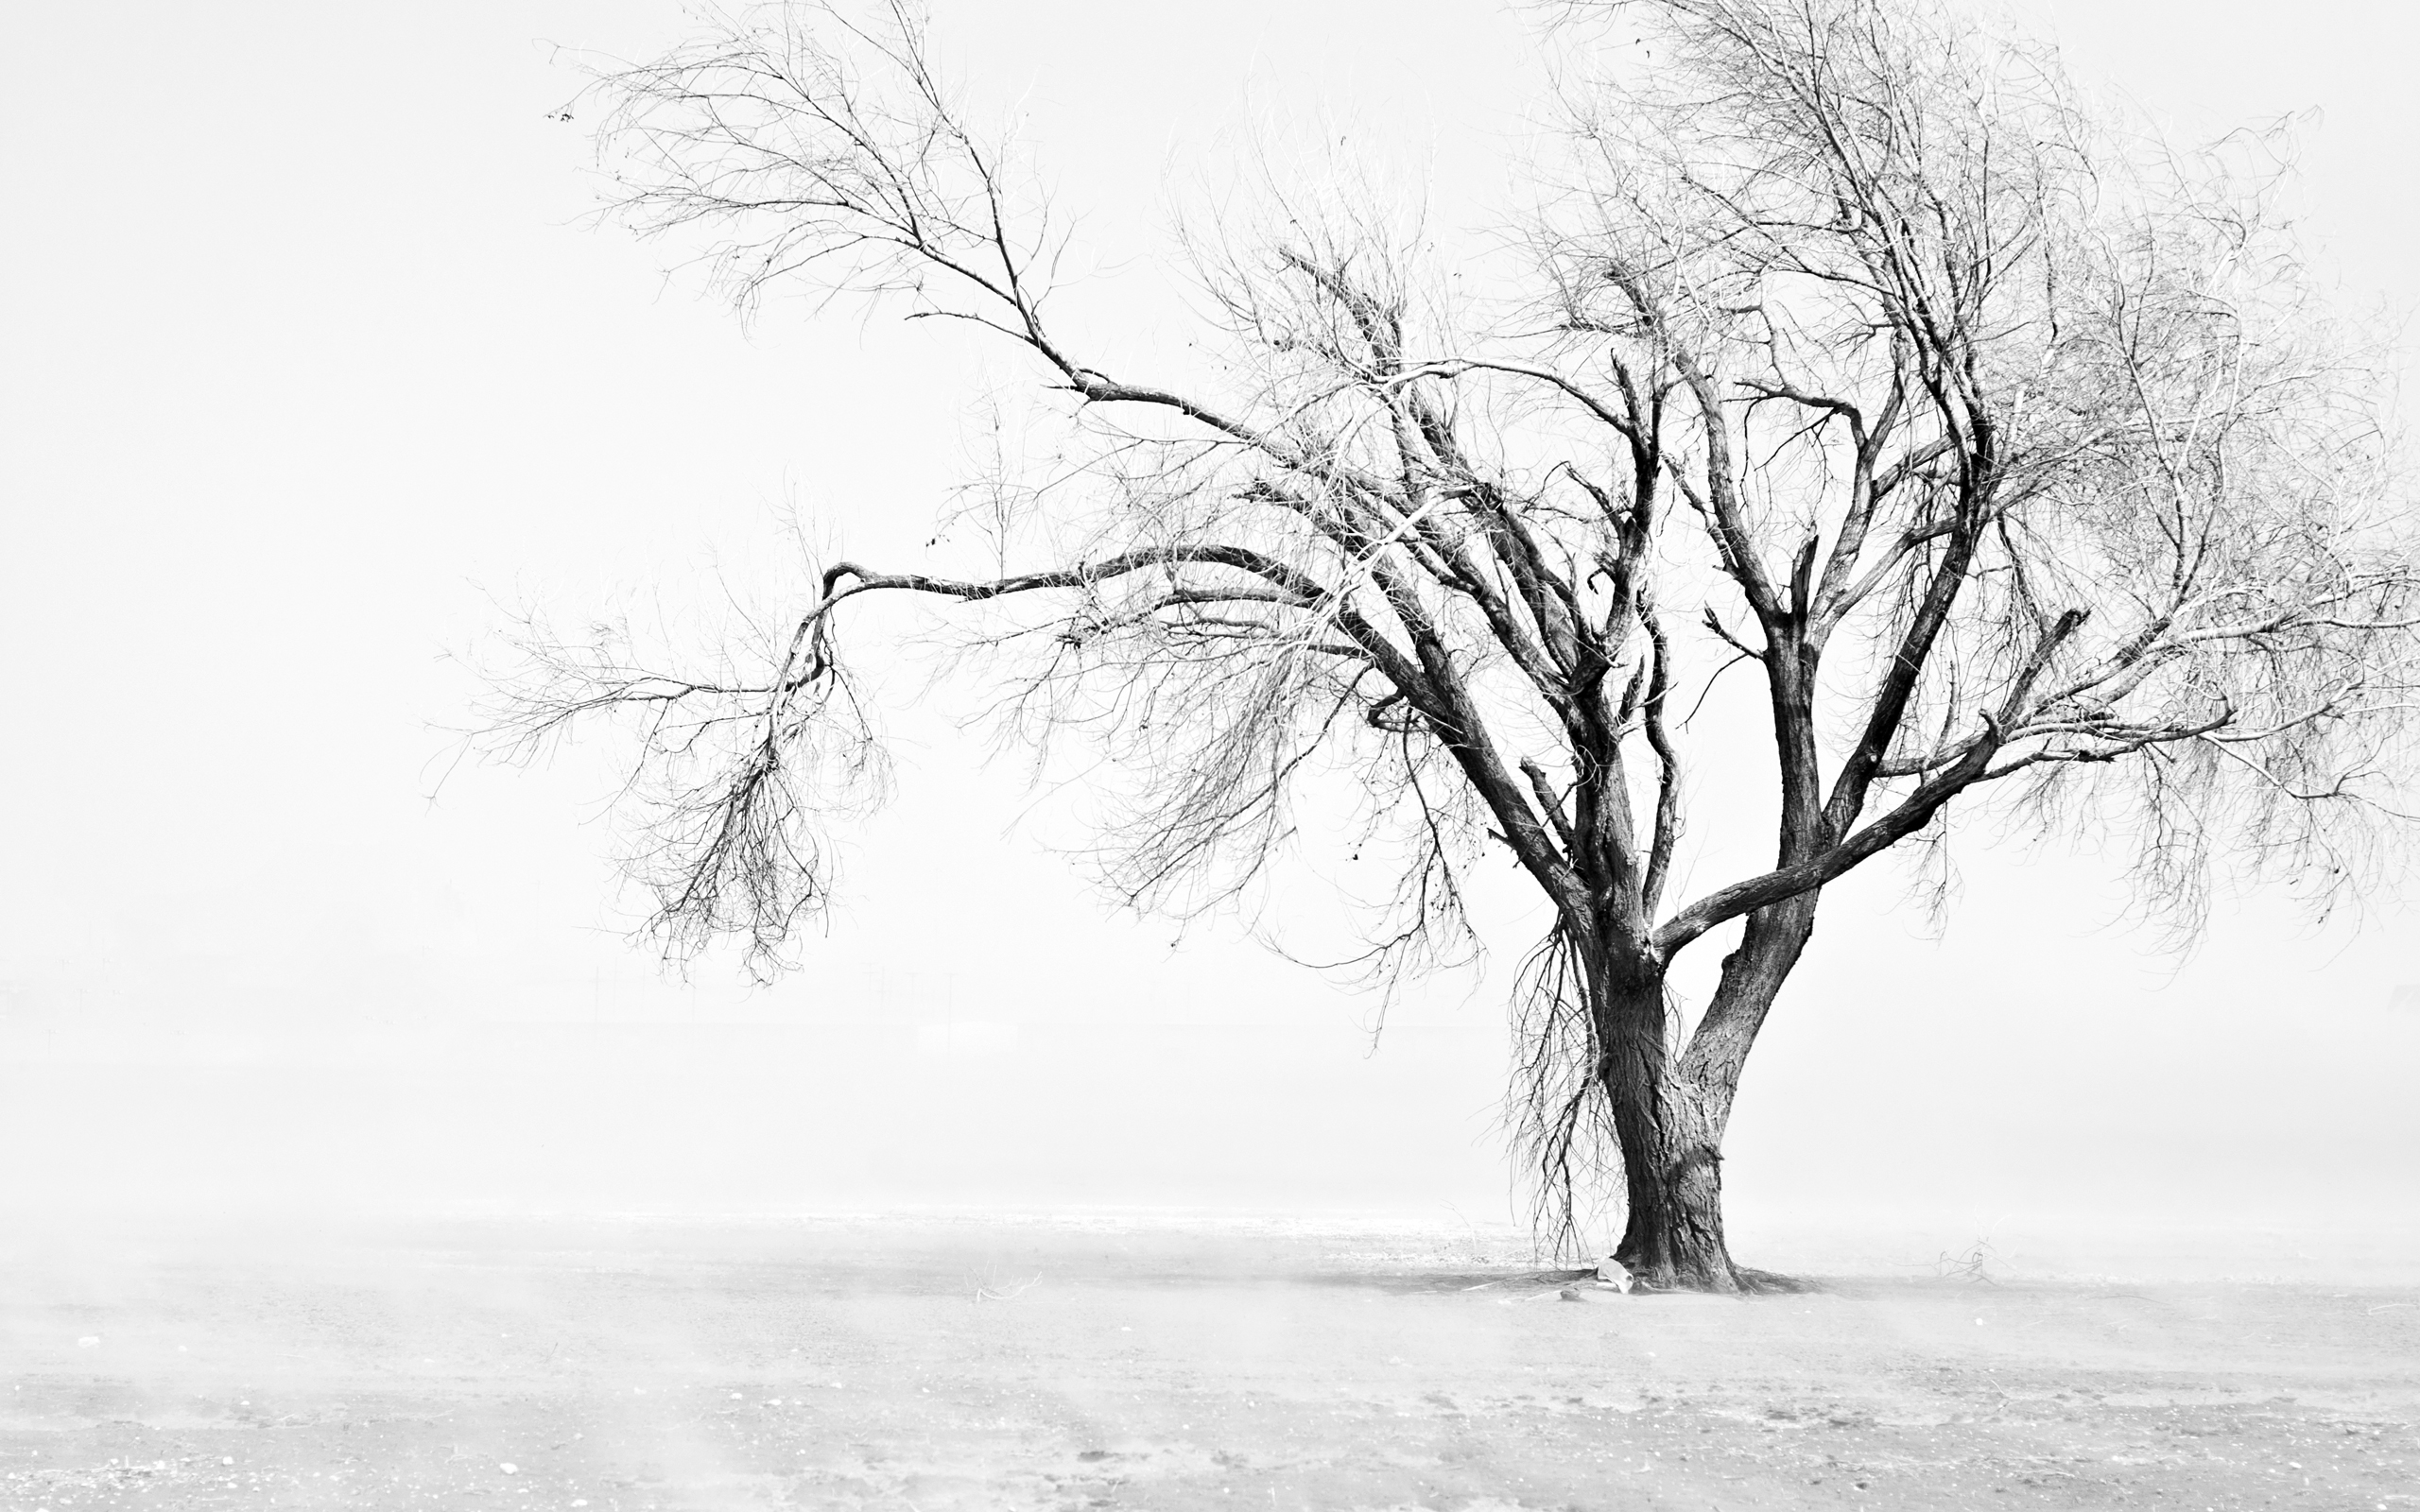 Deserted winter nature scene with a lone tree surrounded by a dusty field in Texas.